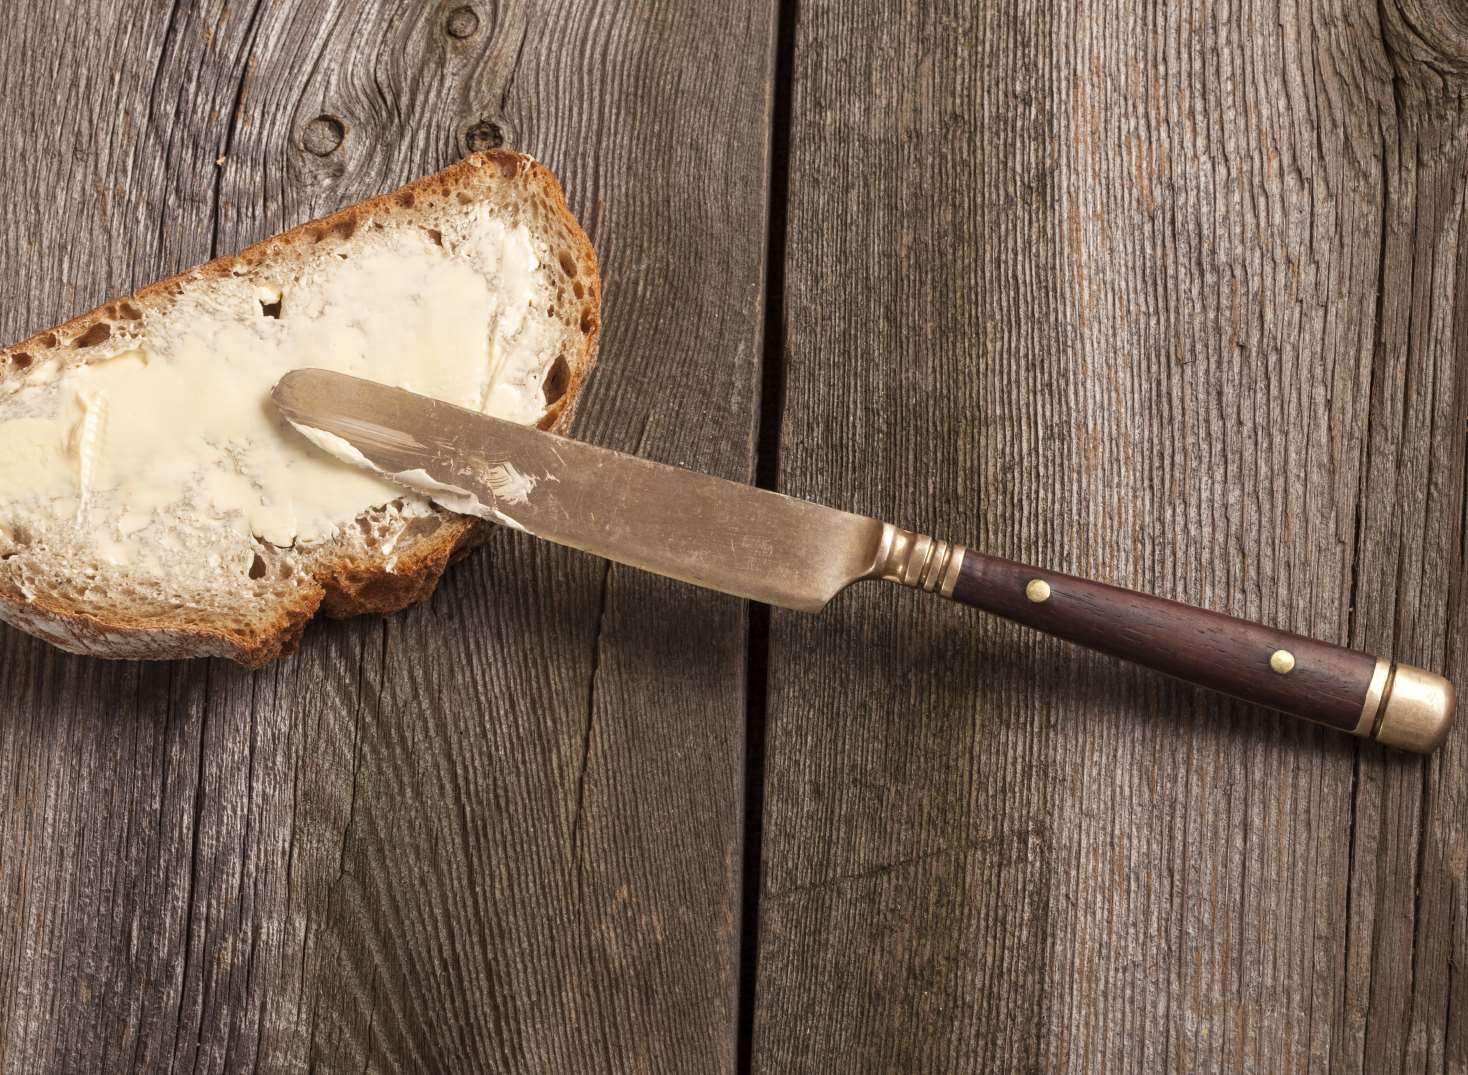 A butter knife. Stock image